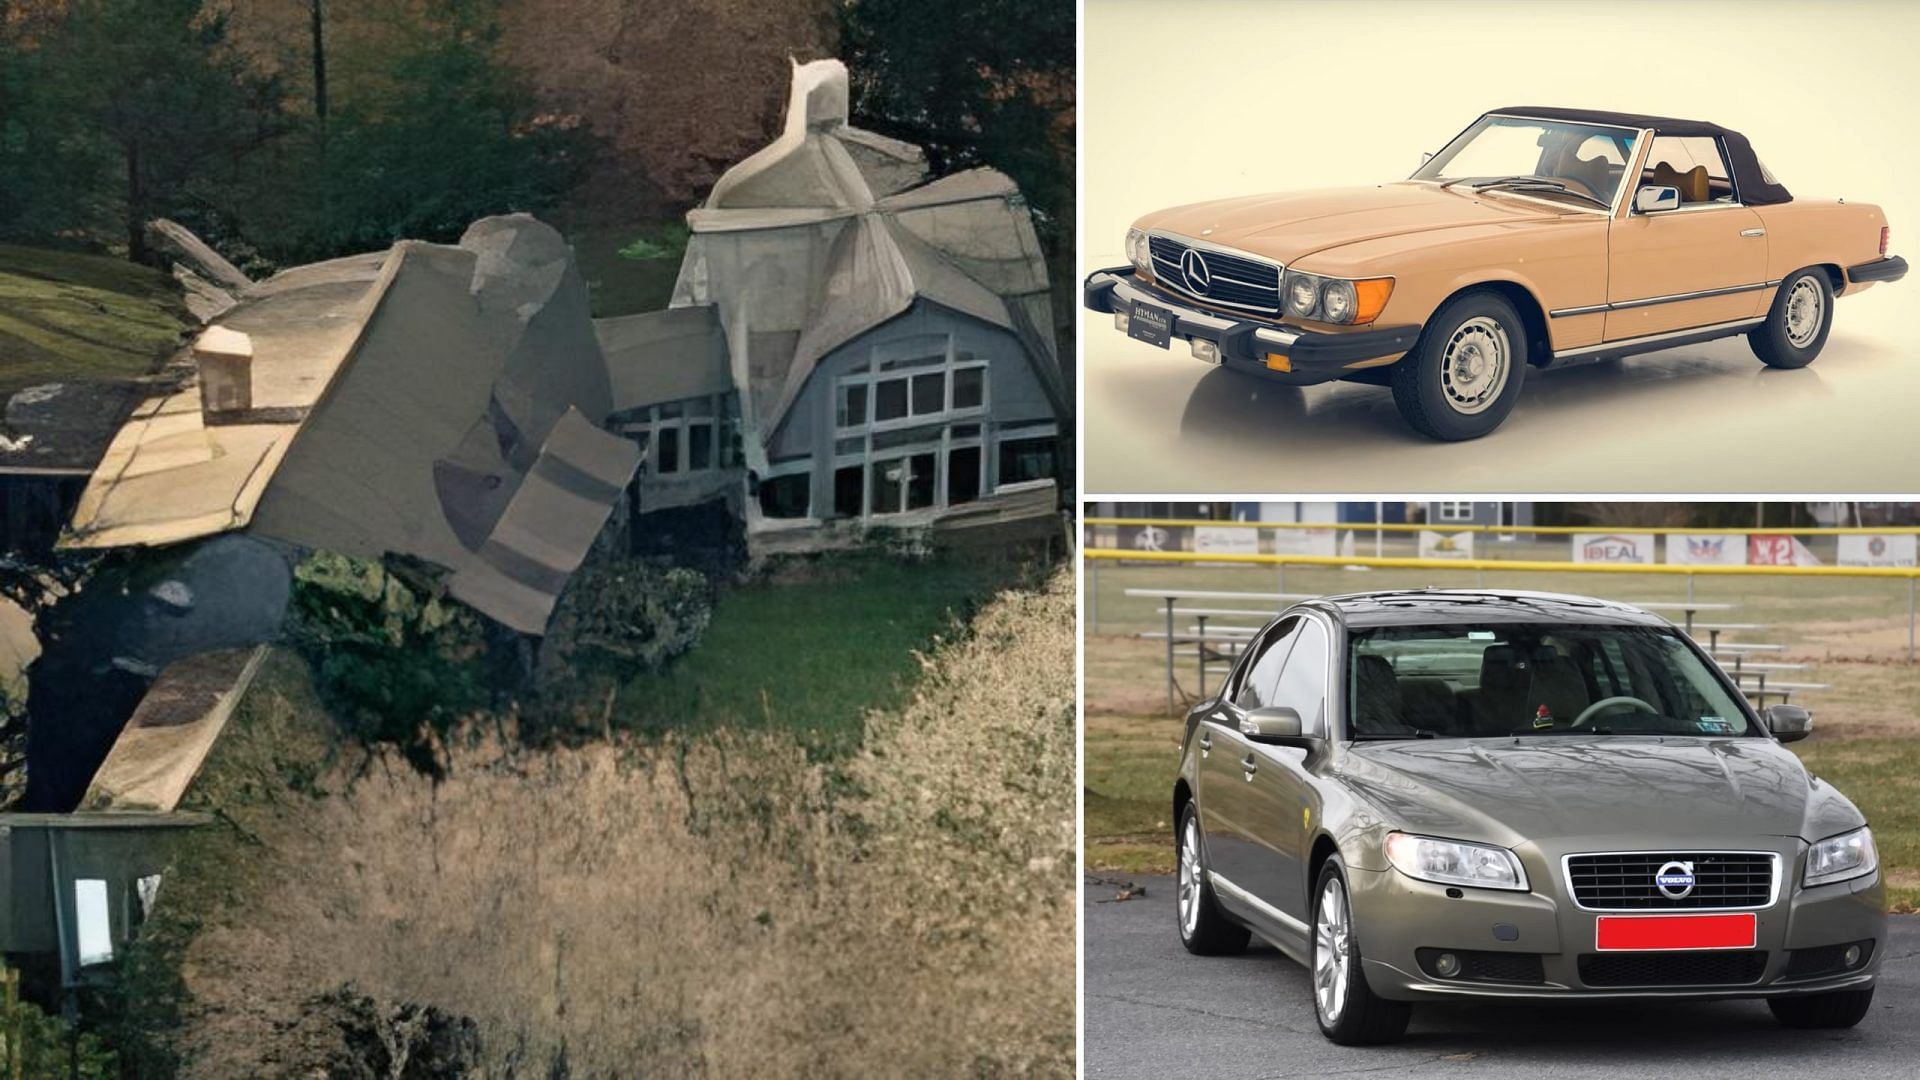 Christopher Walken's Connecticut house and his Mercedes 450 SL and Volvo S80